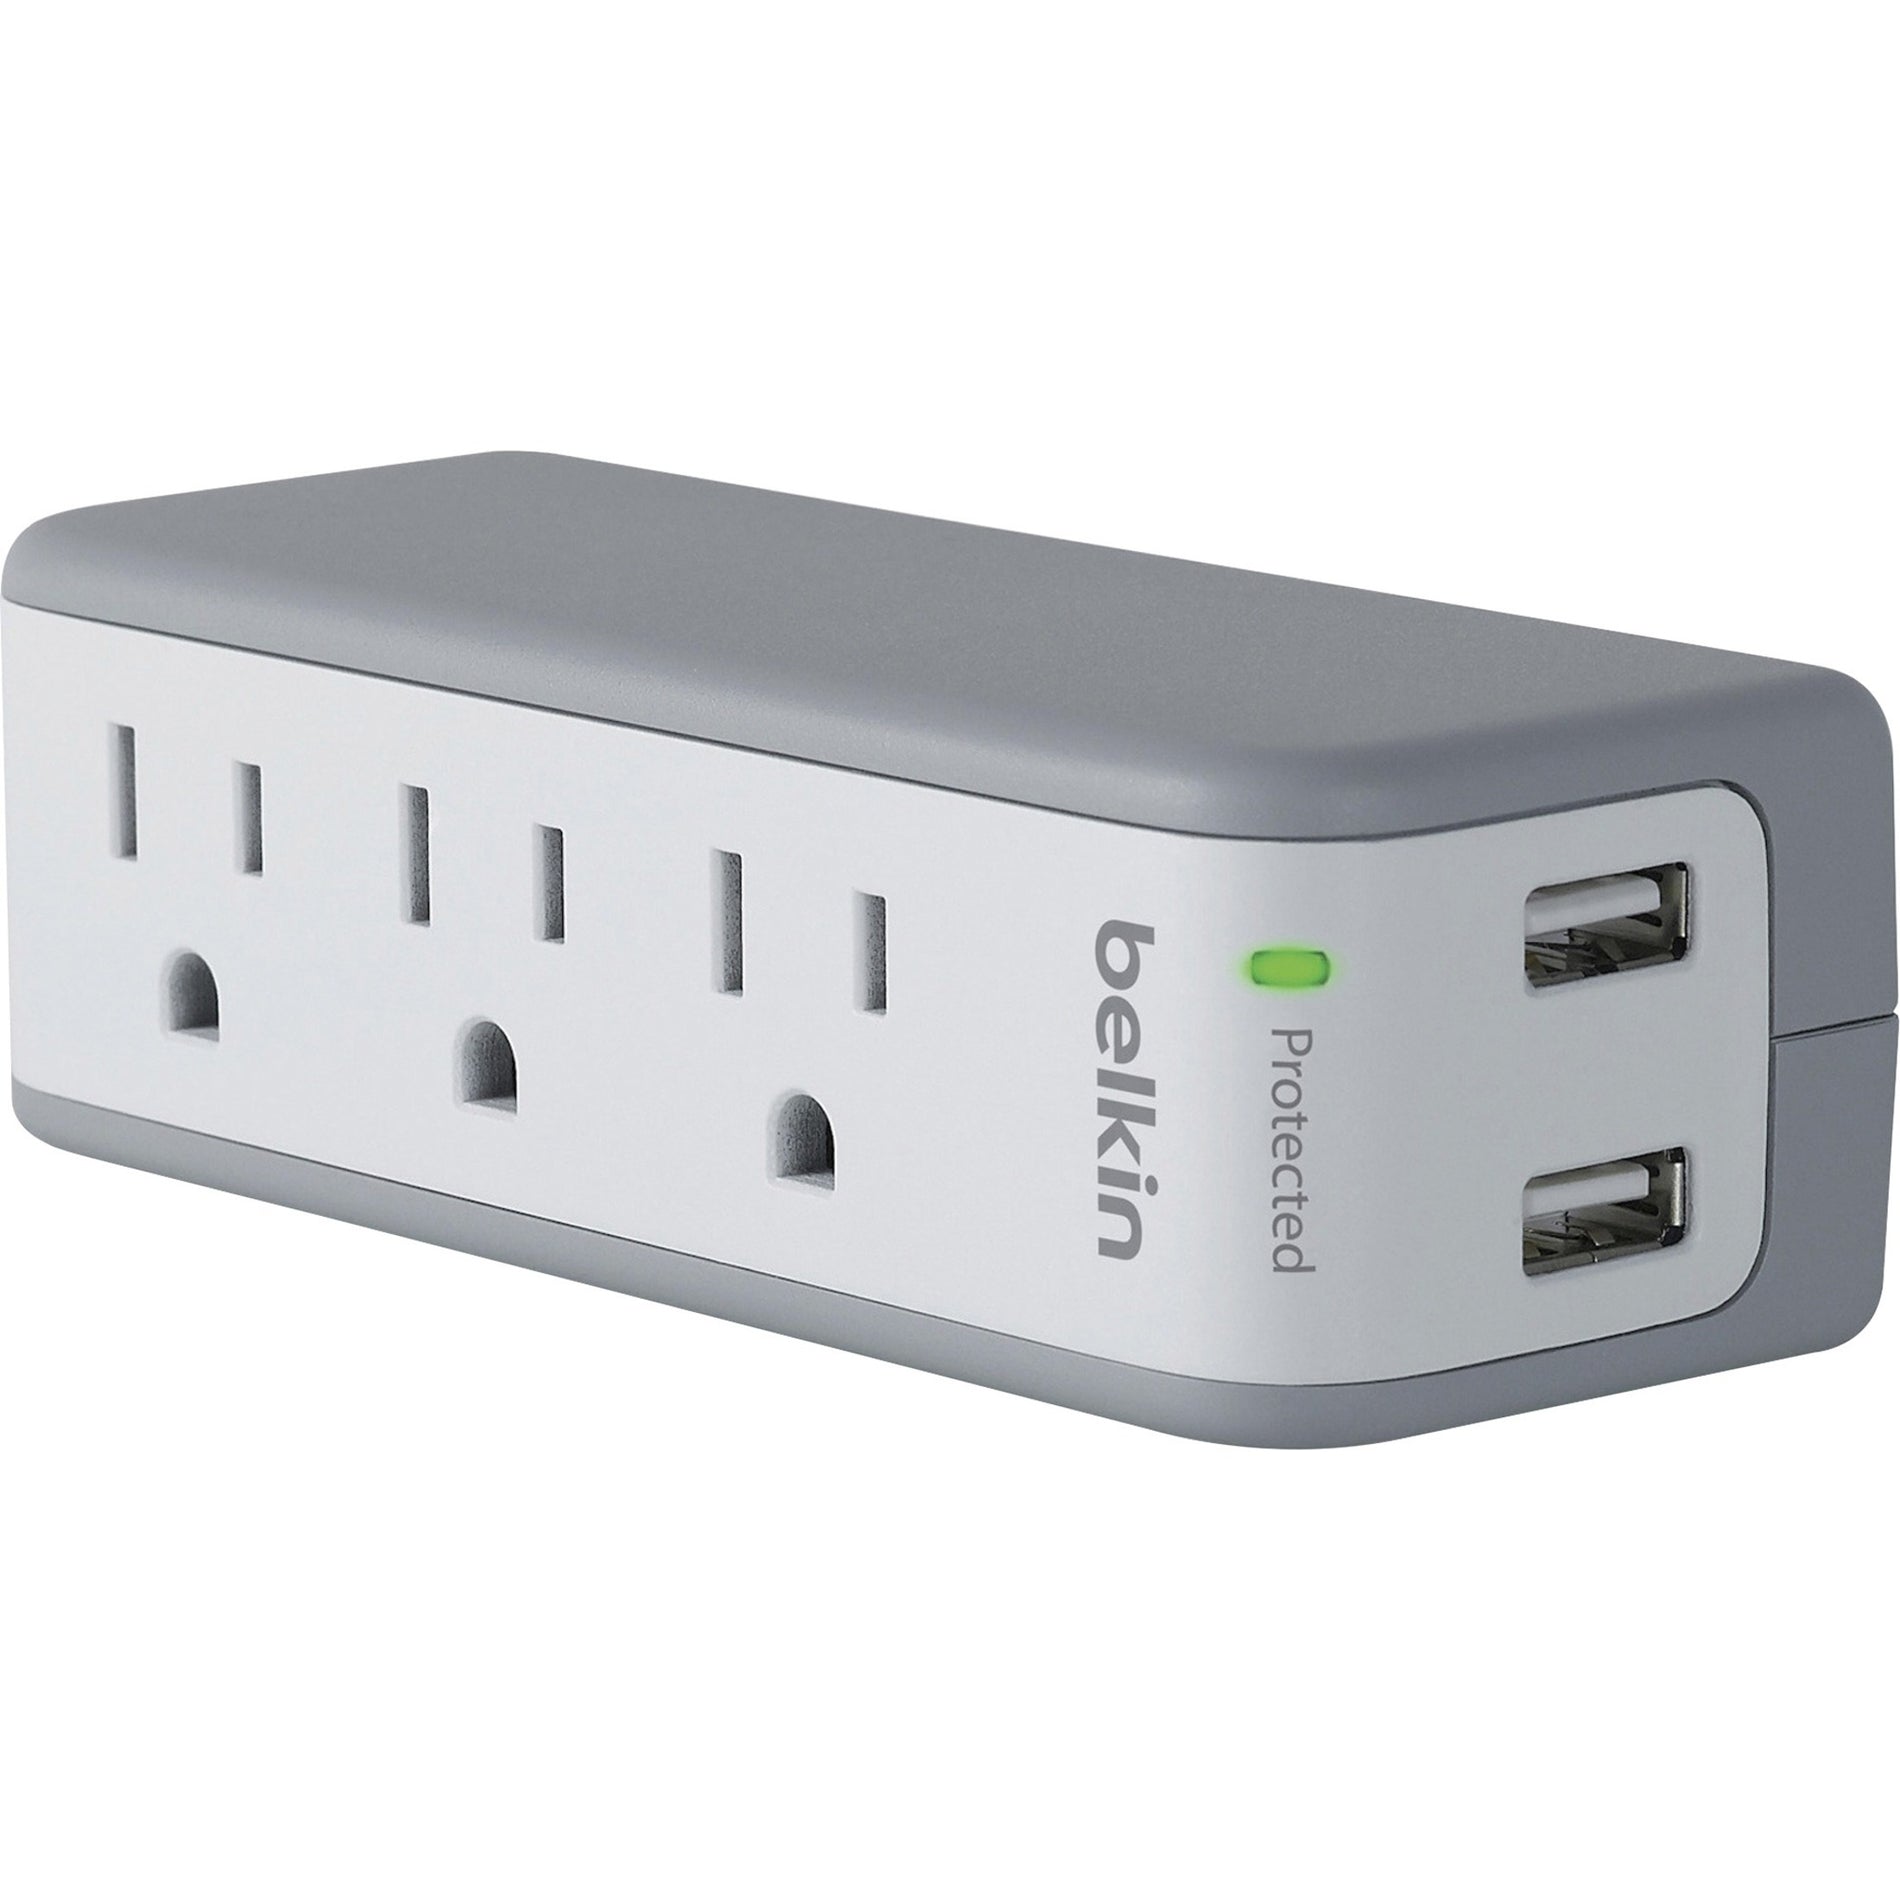 Belkin BST300BG 3-Outlet Mini Surge Protector with USB Ports (2.1 AMP), Compact Design, Lifetime Warranty [Discontinued]